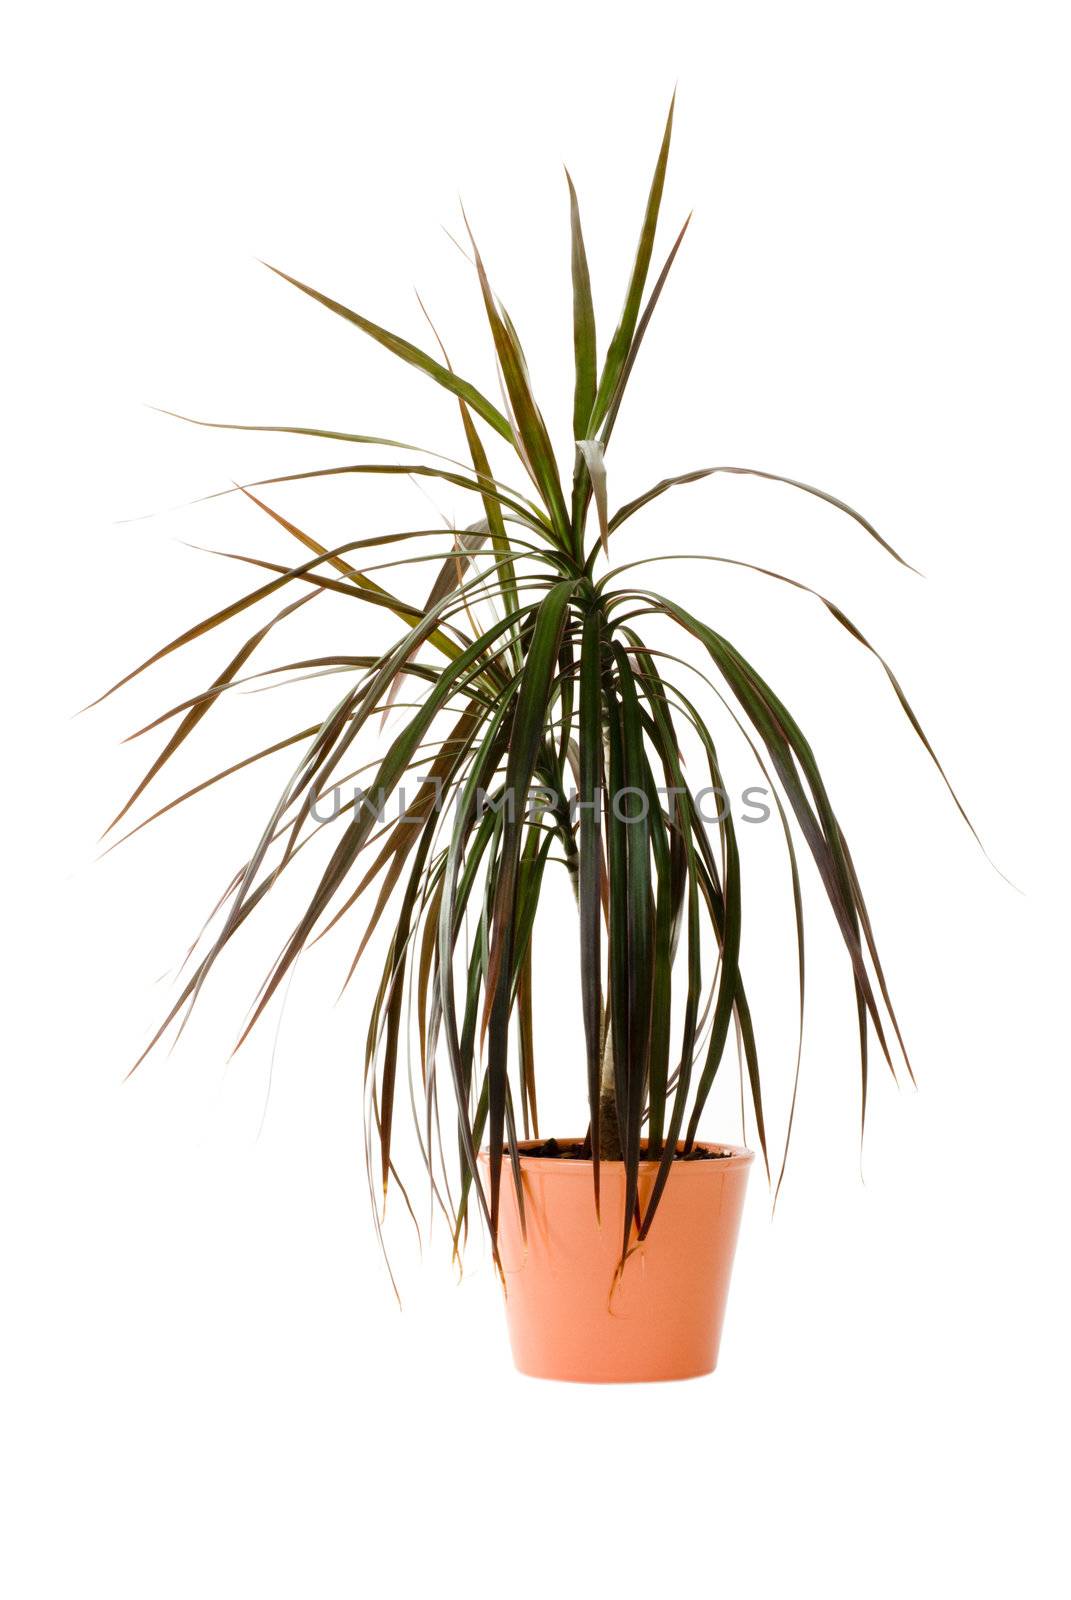 Plant in a pot by eugenef